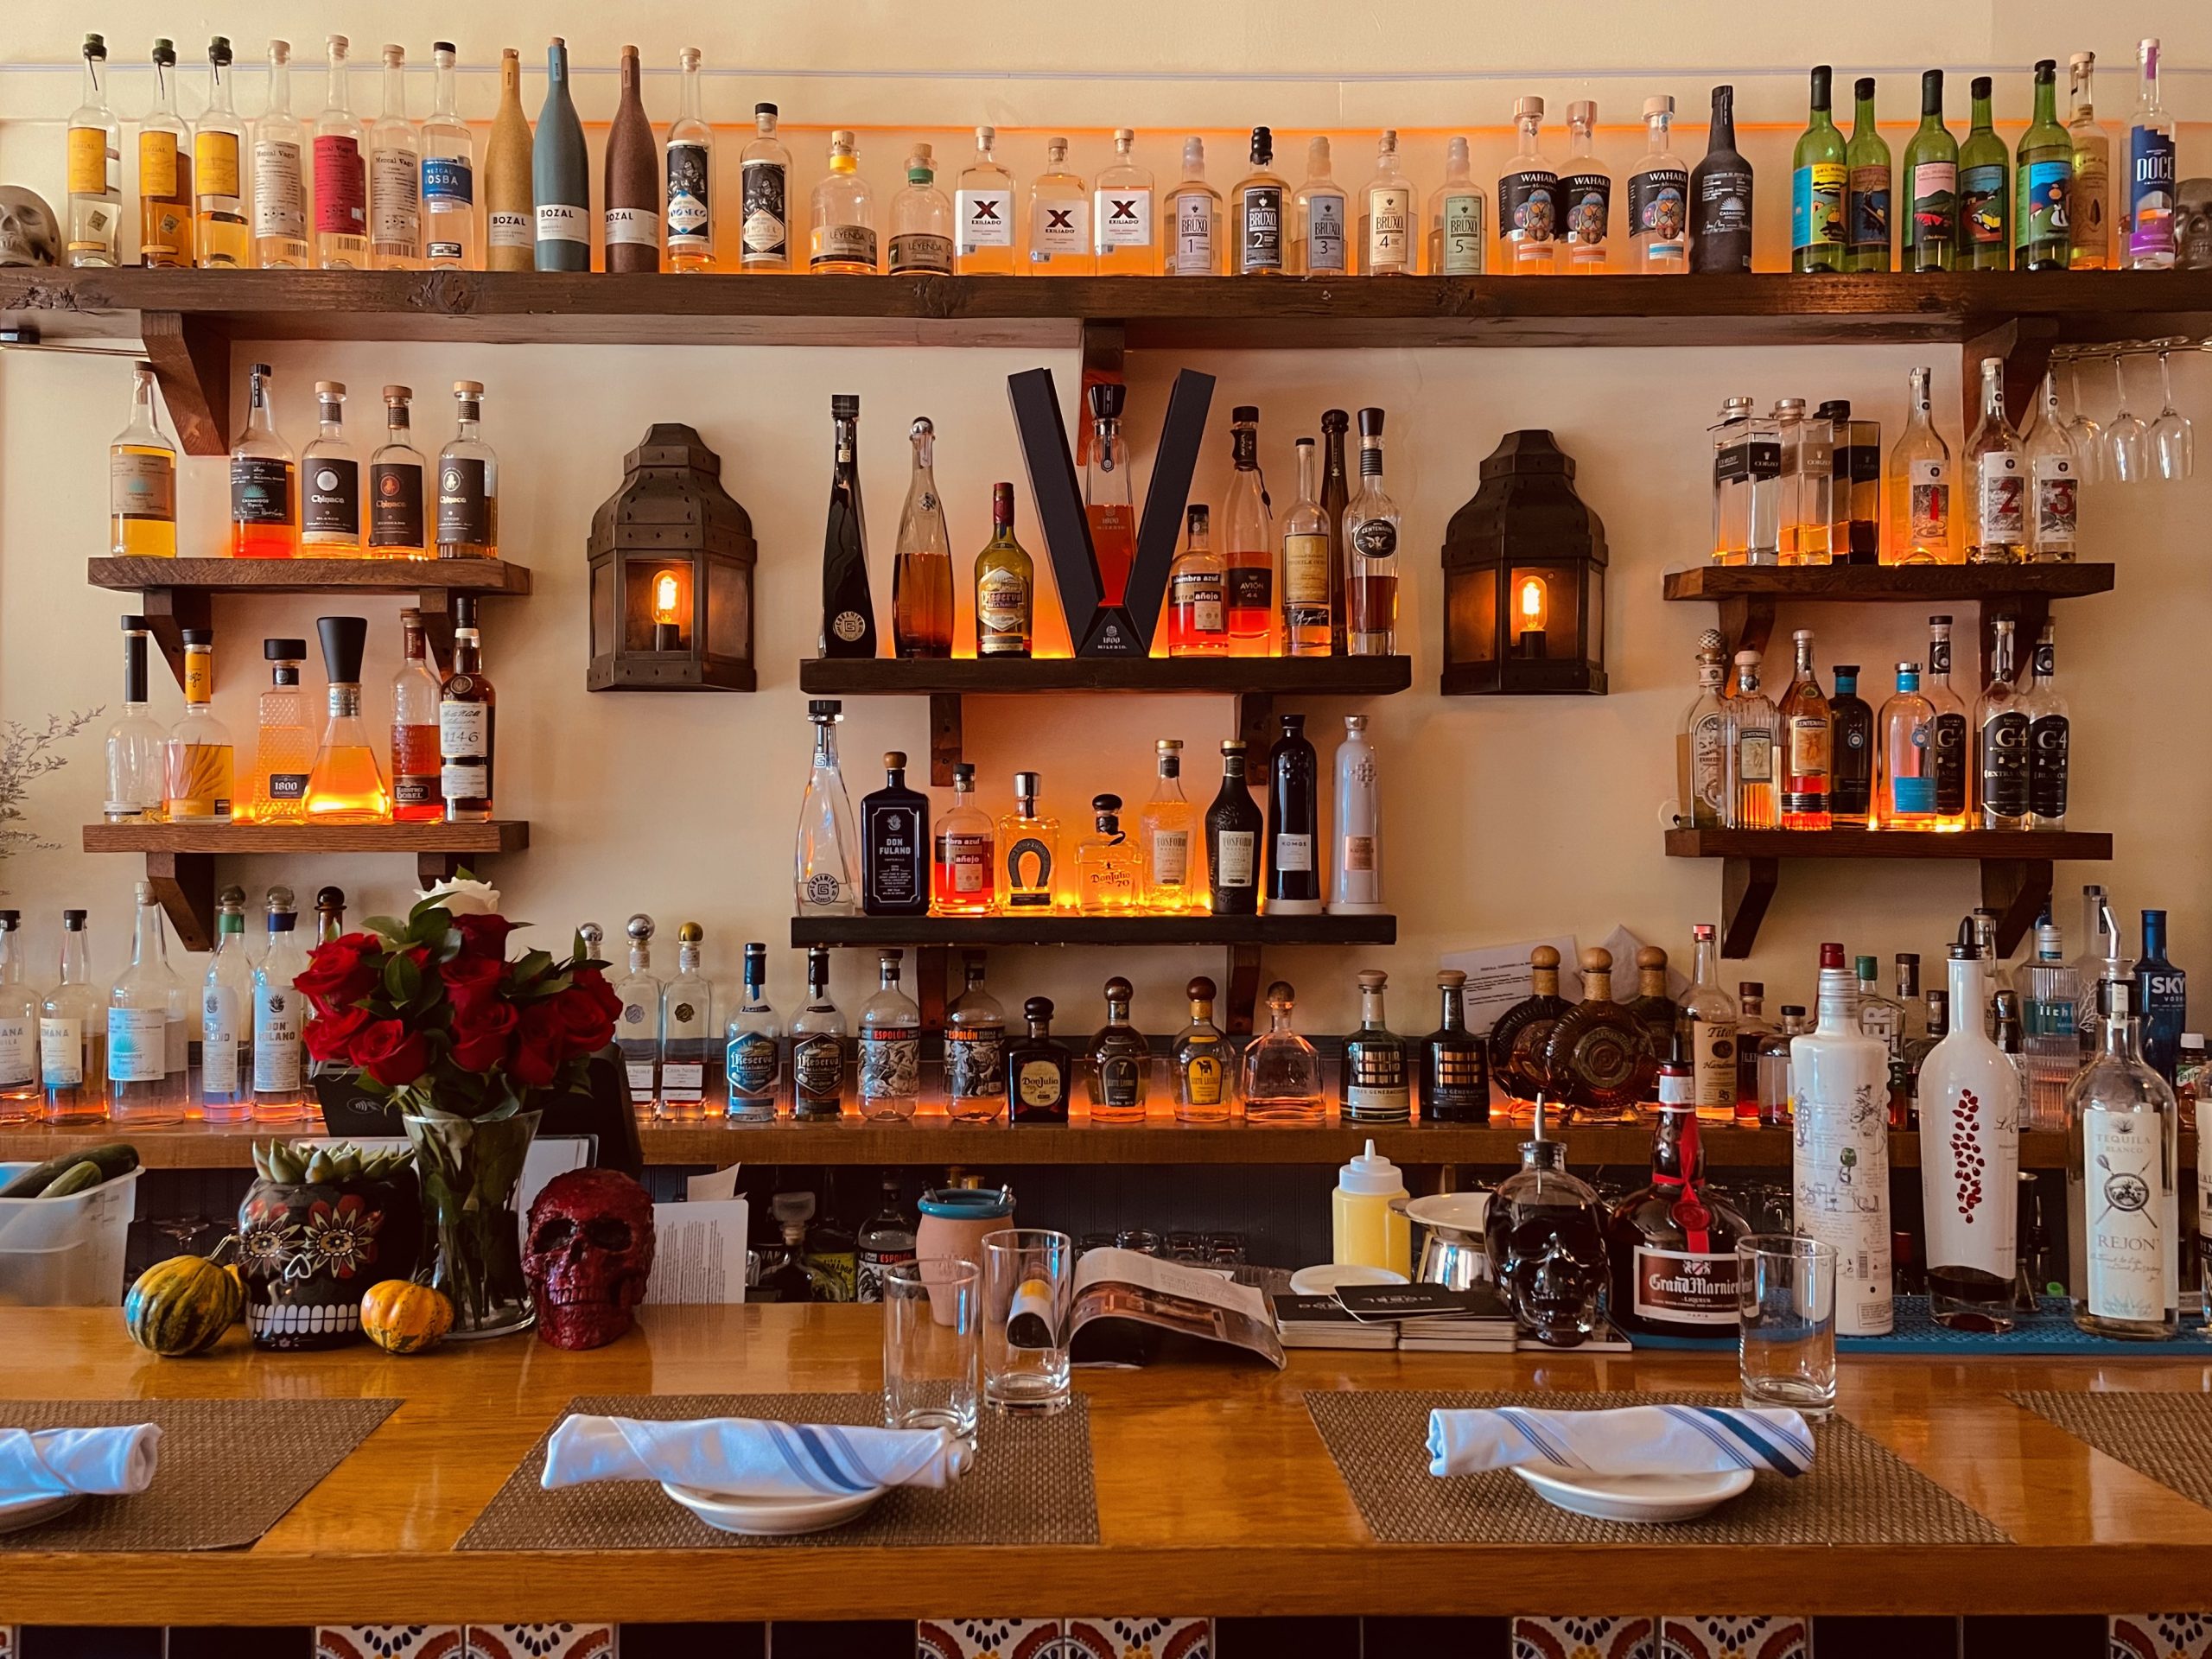 Get Ready To Enjoy The Biggest Bar For Tequila And Mezcal Selection In Brooklyn